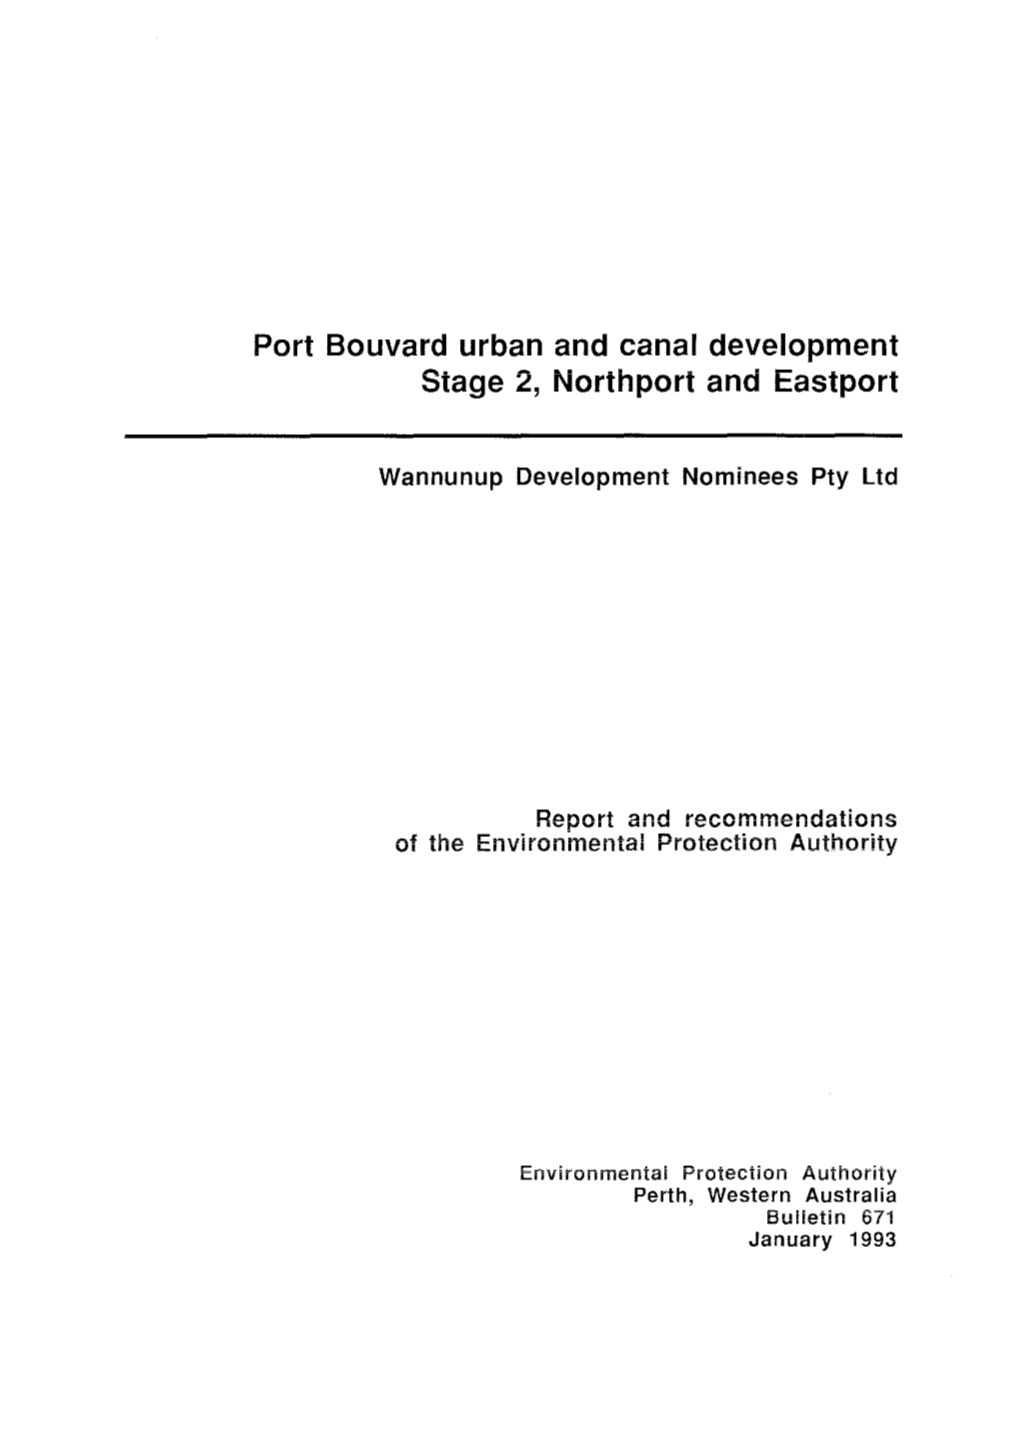 Port Bouvard Urban and Canal Development Stage 2, Northport and Eastport